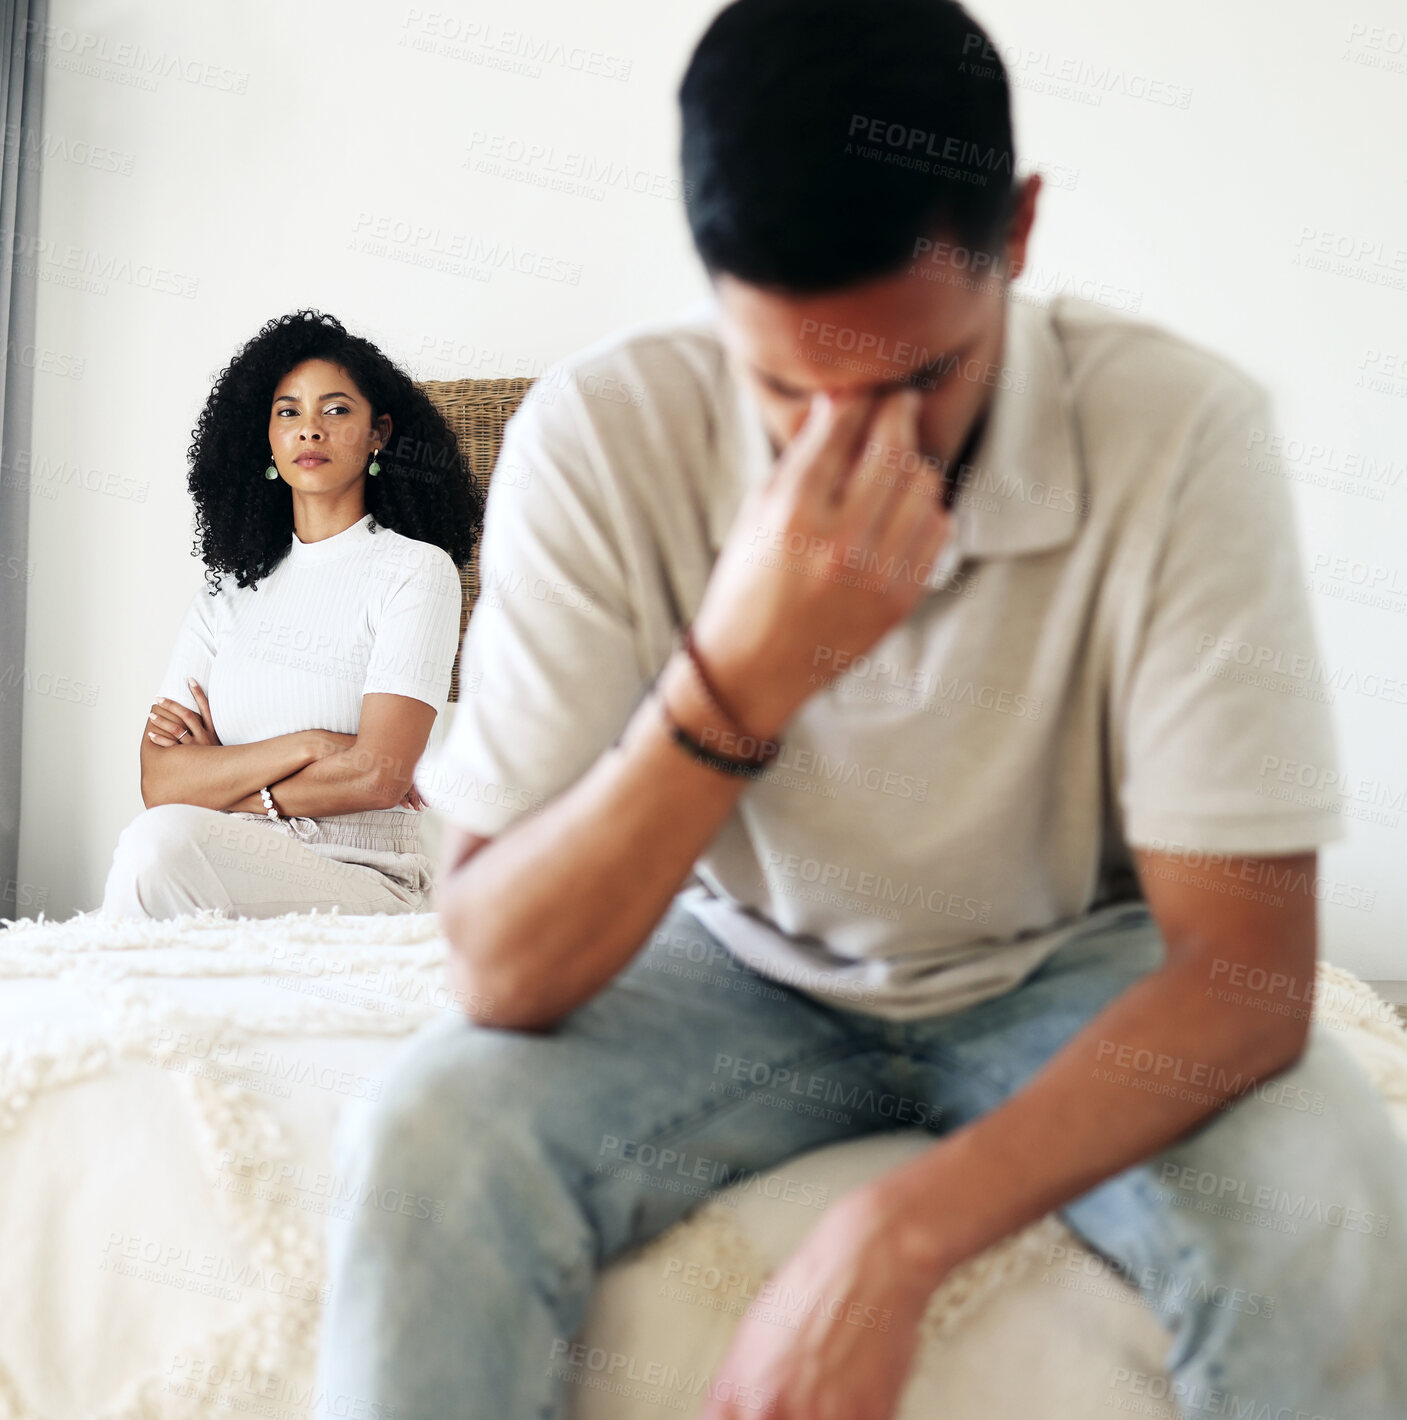 Buy stock photo Divorce, sad and couple breakup or fighting in a bedroom unhappy with relationship due o cheating in a home or house. Woman, man or people with stress arguing in sadness due to infidelity